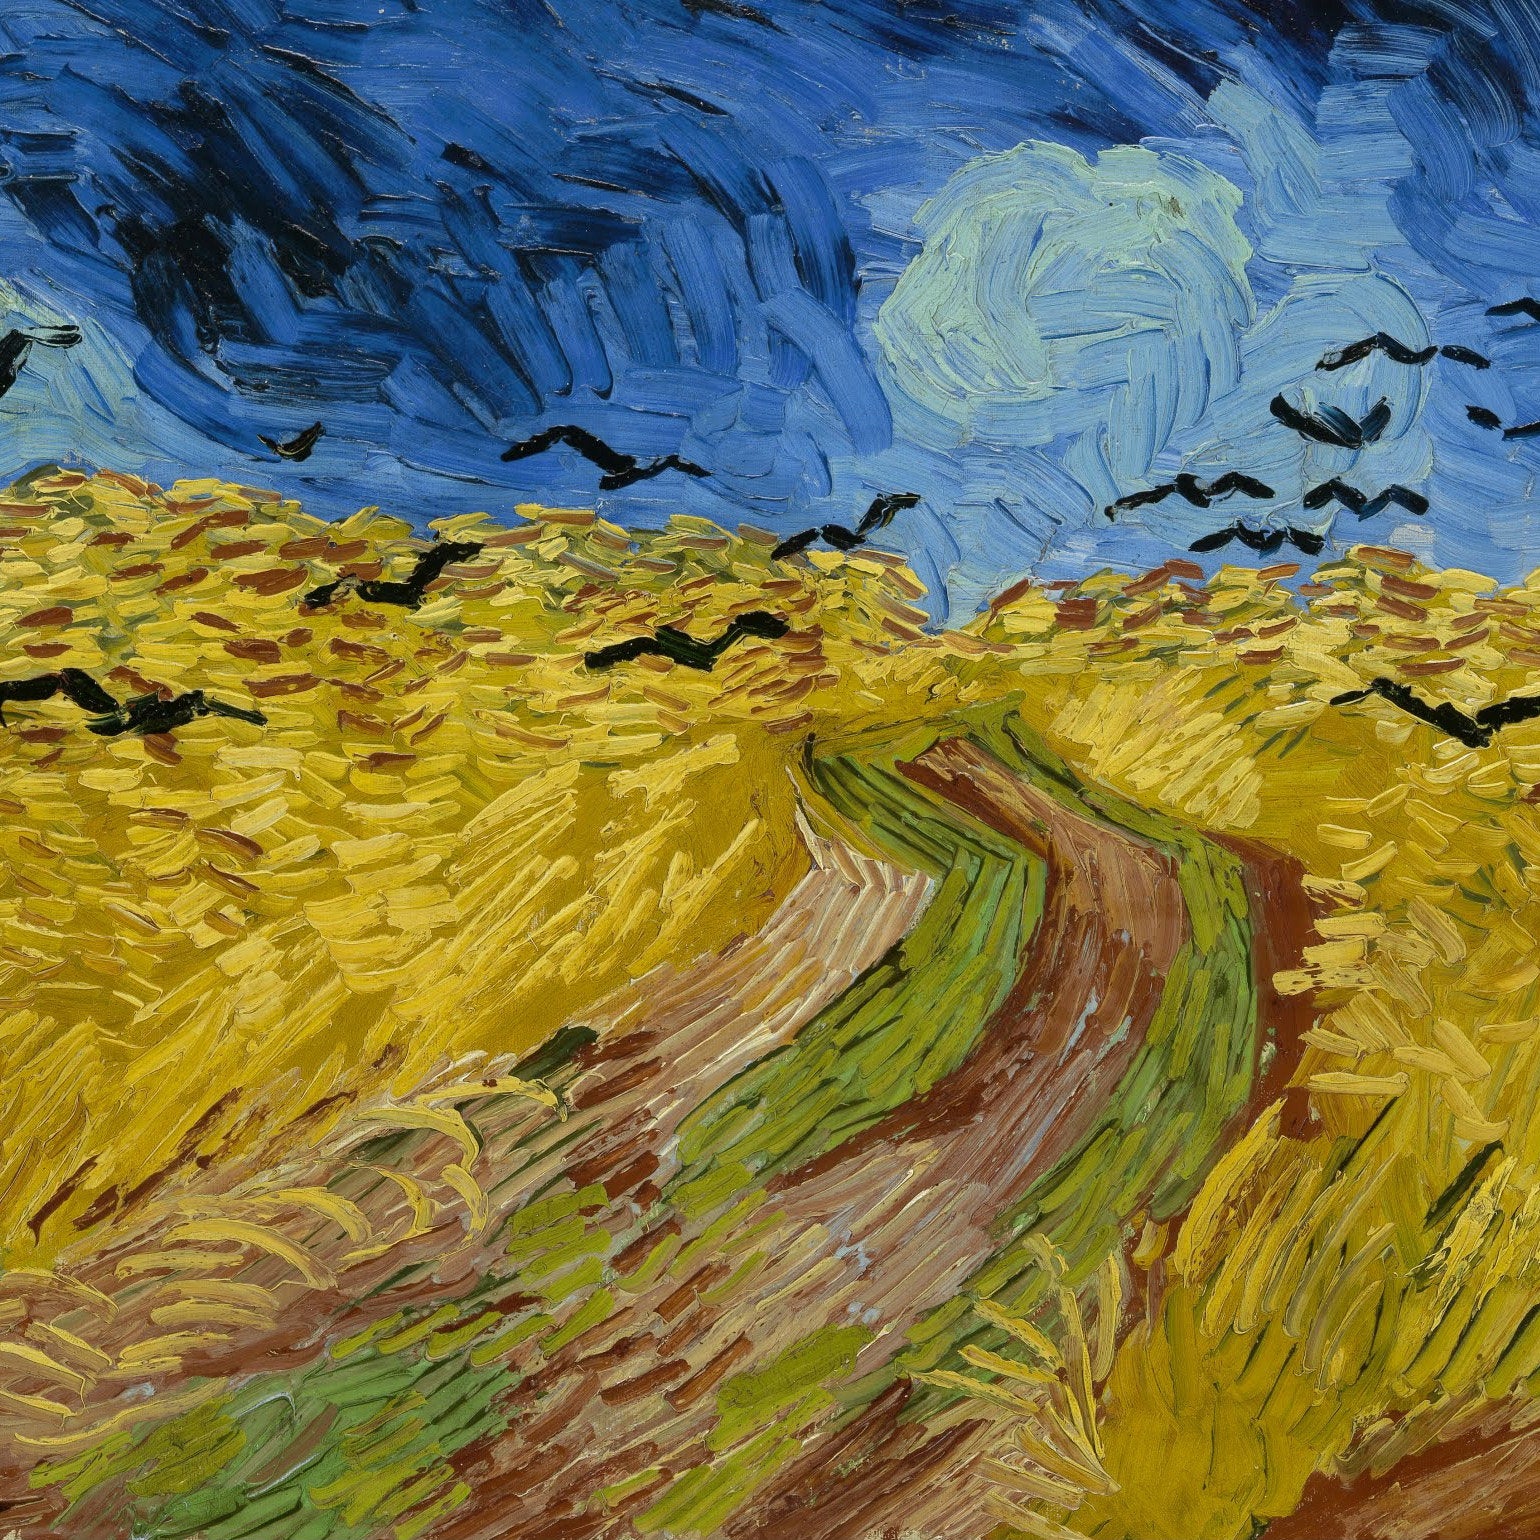 Crows by Vincent Van Gogh, 3d Printed with texture and brush strokes looks like original oil-painting, code:077